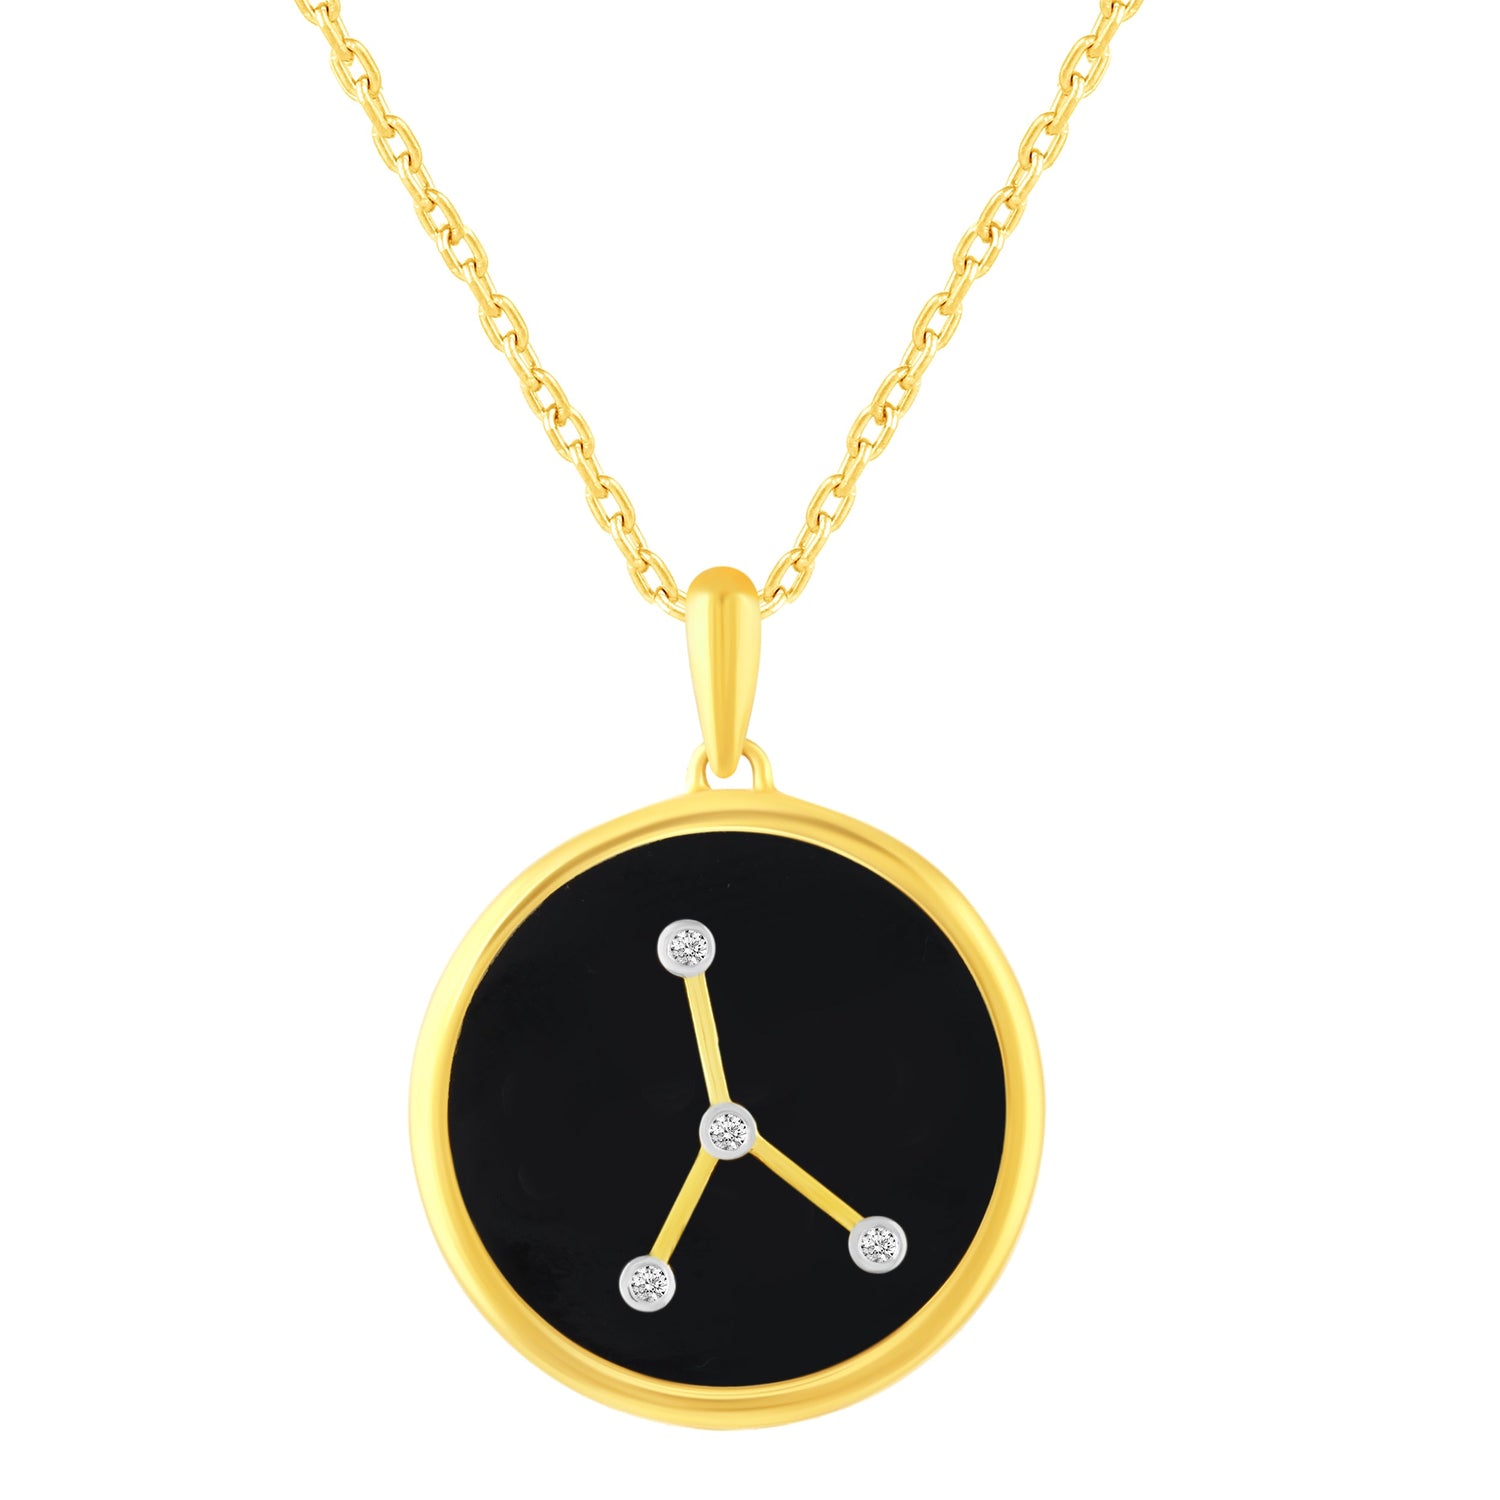 1/20 Cttw Diamond Zodiac Pendant Necklace set in 925 Sterling Silver 14K Yellow Gold Plating